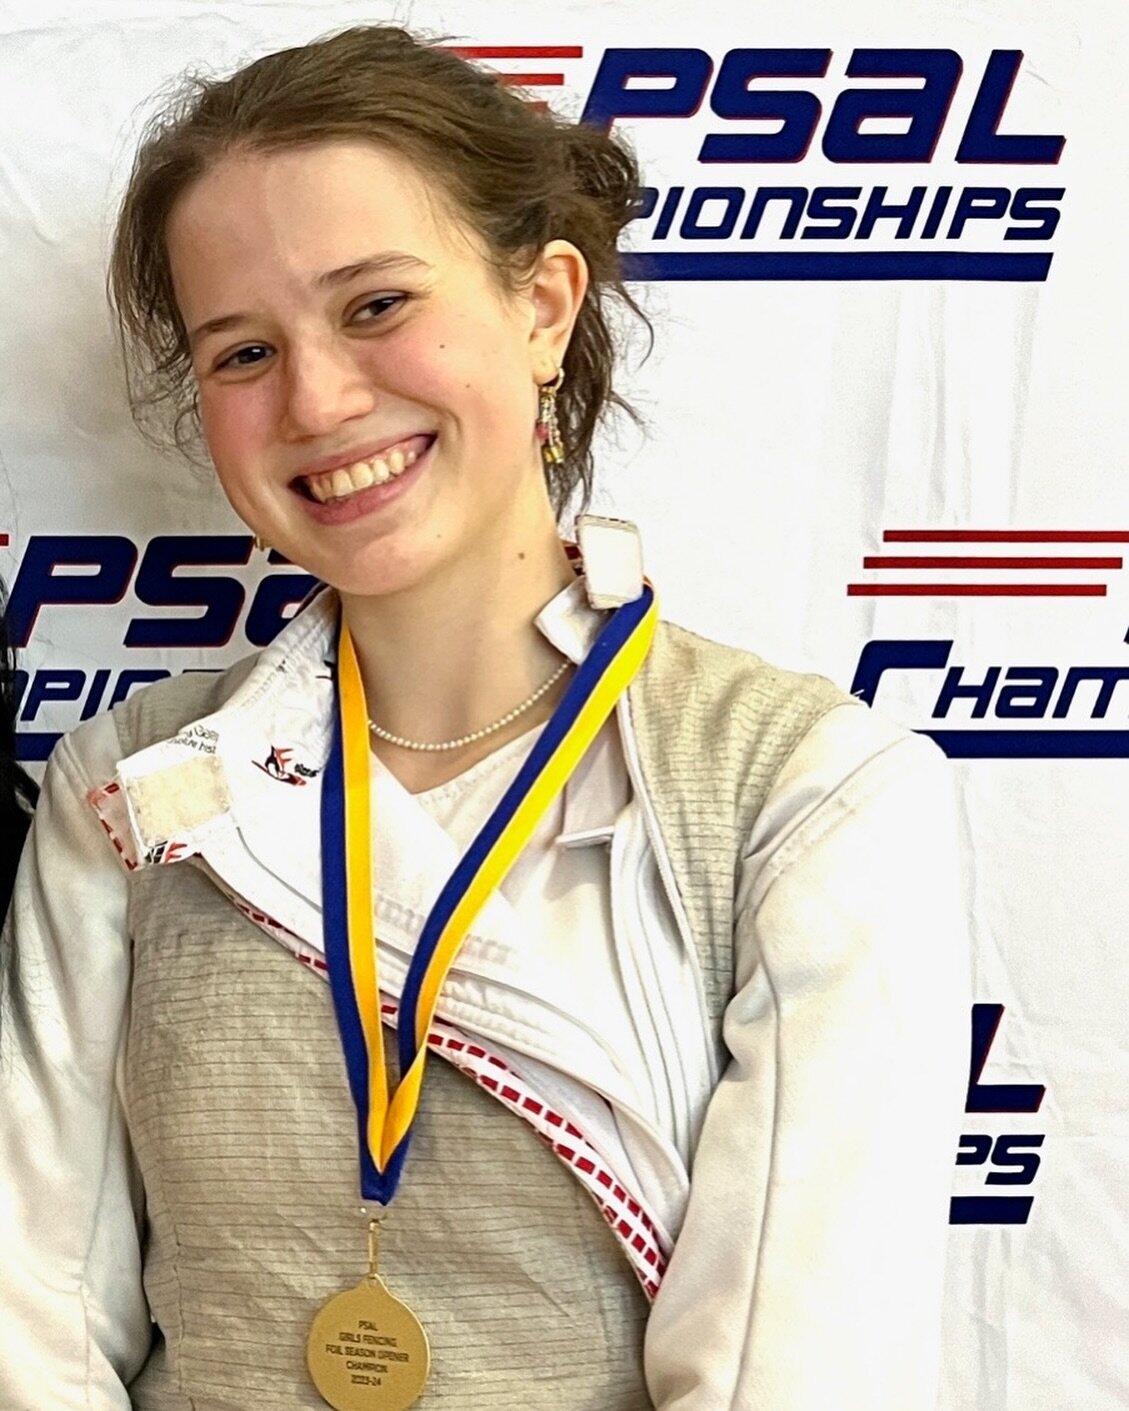 Congratulations to Nia for winning the PSAL season opener on Sunday. A testament to her hard work and dedication. Well done from all of us at Brooklyn Bridge Fencing Club!

#foil #brooklynfencing #fencinglife #fencing #fencingposts #fencingteam #broo